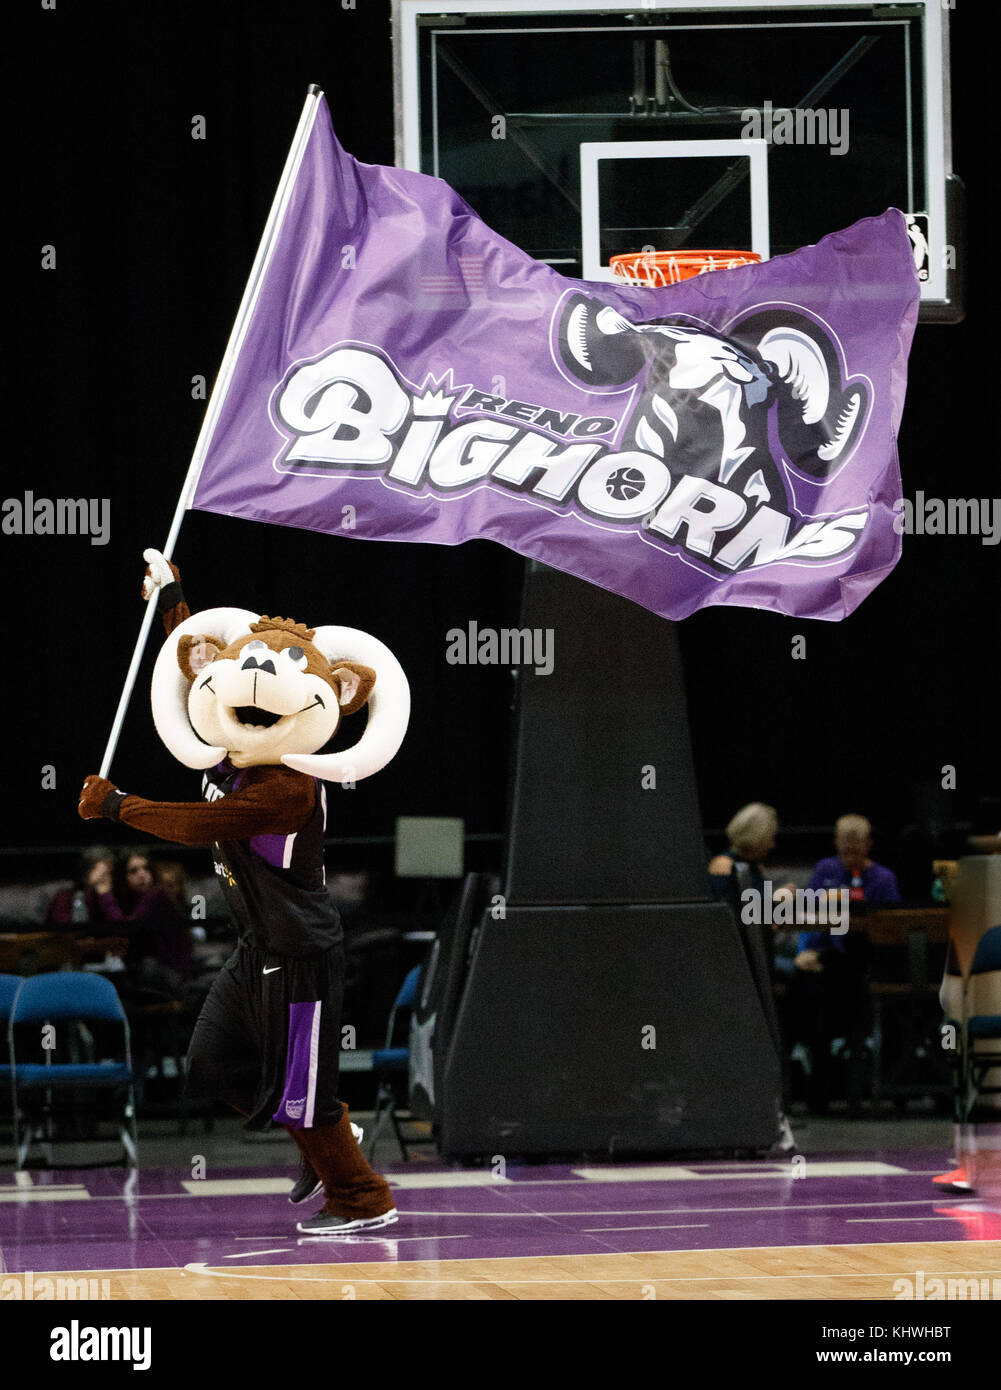 Reno, Nevada, USA. 19th Nov, 2017. Bruno the Bighorn sports the new Sacramento Kings inspired color scheme for the 2017-2018 season before the NBA G-League Basketball game between the Reno Bighorns and the Long Island Nets at the Reno Events Center in Reno, Nevada. Credit: Jeff Mulvihill/ZUMA Wire/Alamy Live News Stock Photo